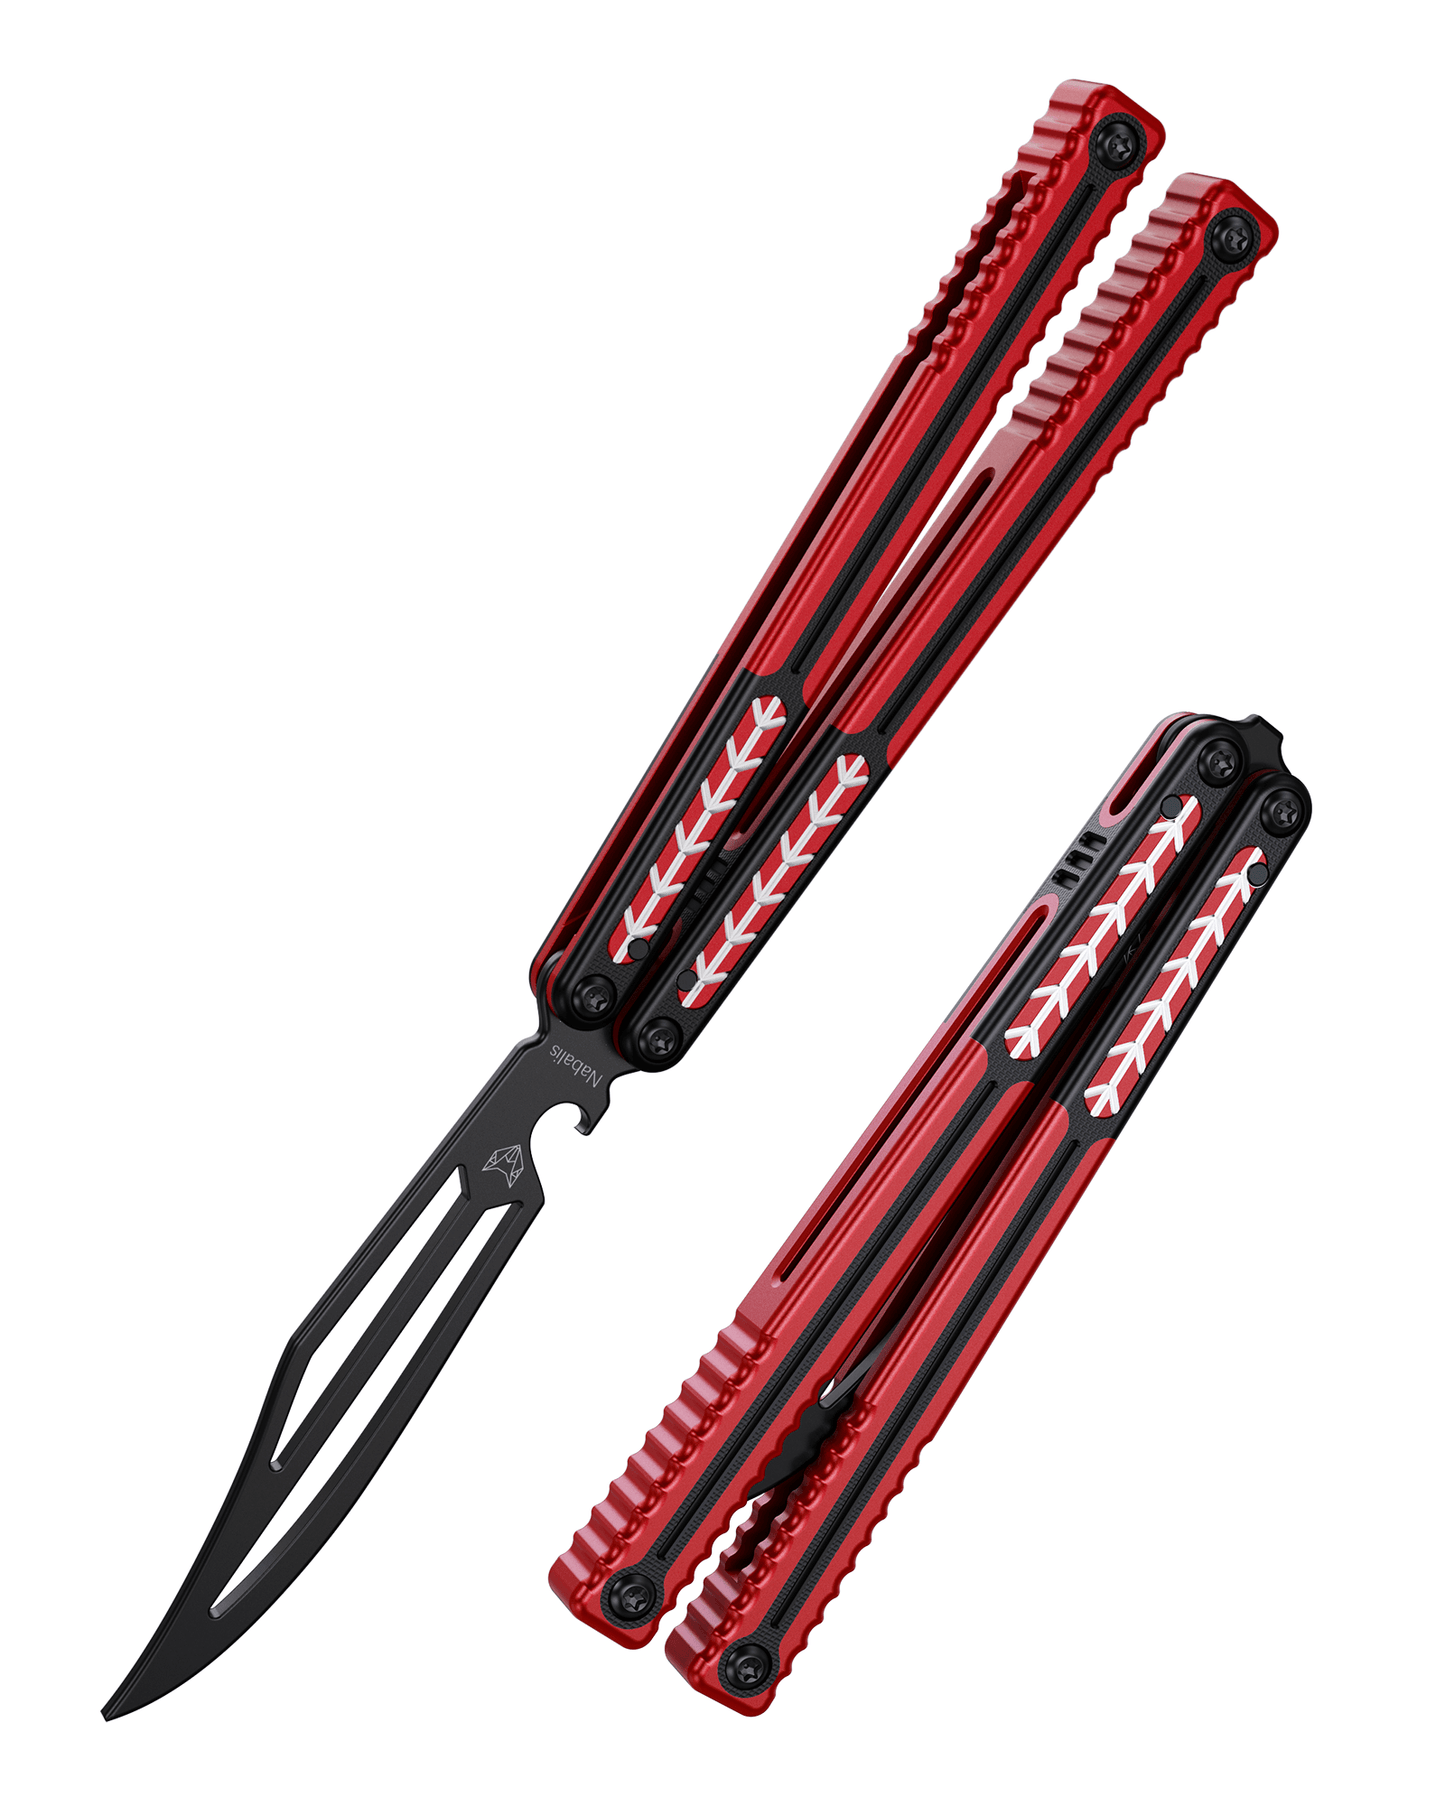 Nabalis Vulp Pro Balisong Butterfly Knife Trainer-Red and Black-Open and Closed